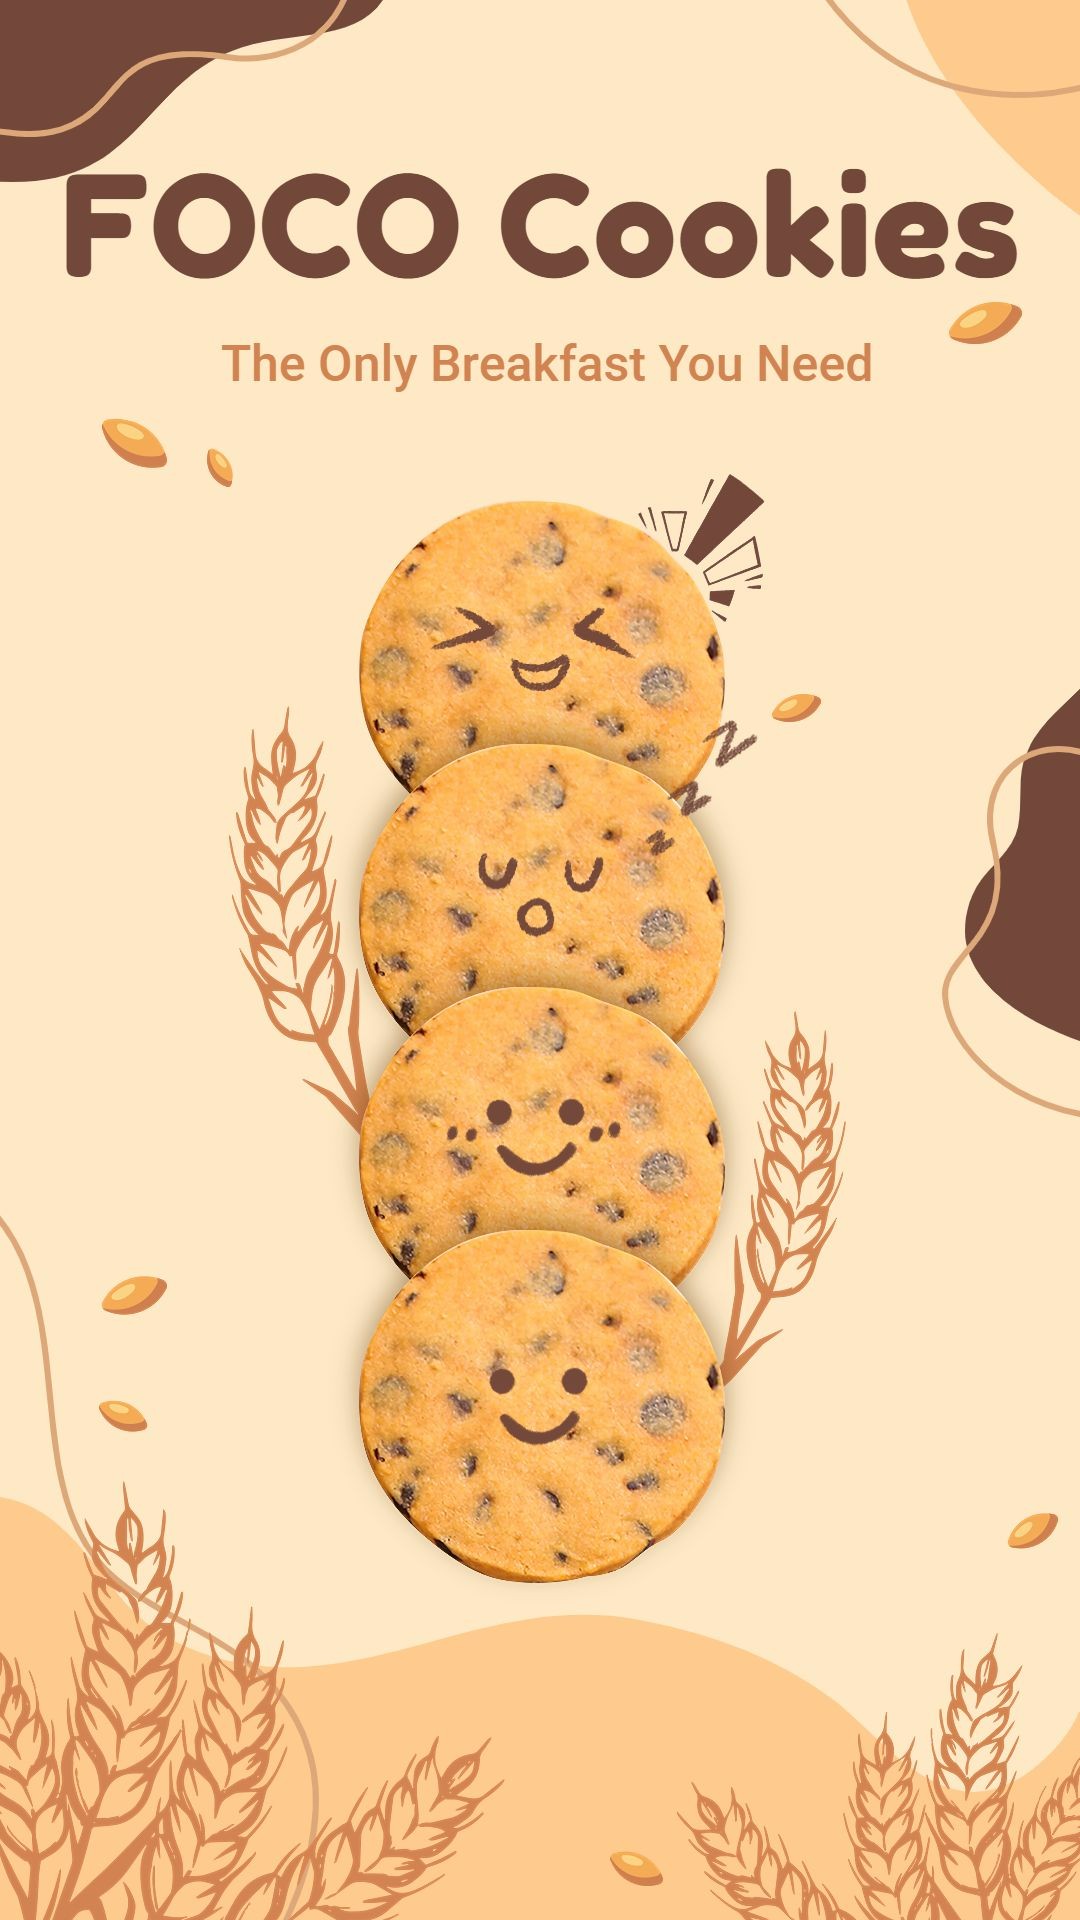 Oat Cookies Consumer Packaged Food Snacks Ecommerce Story预览效果